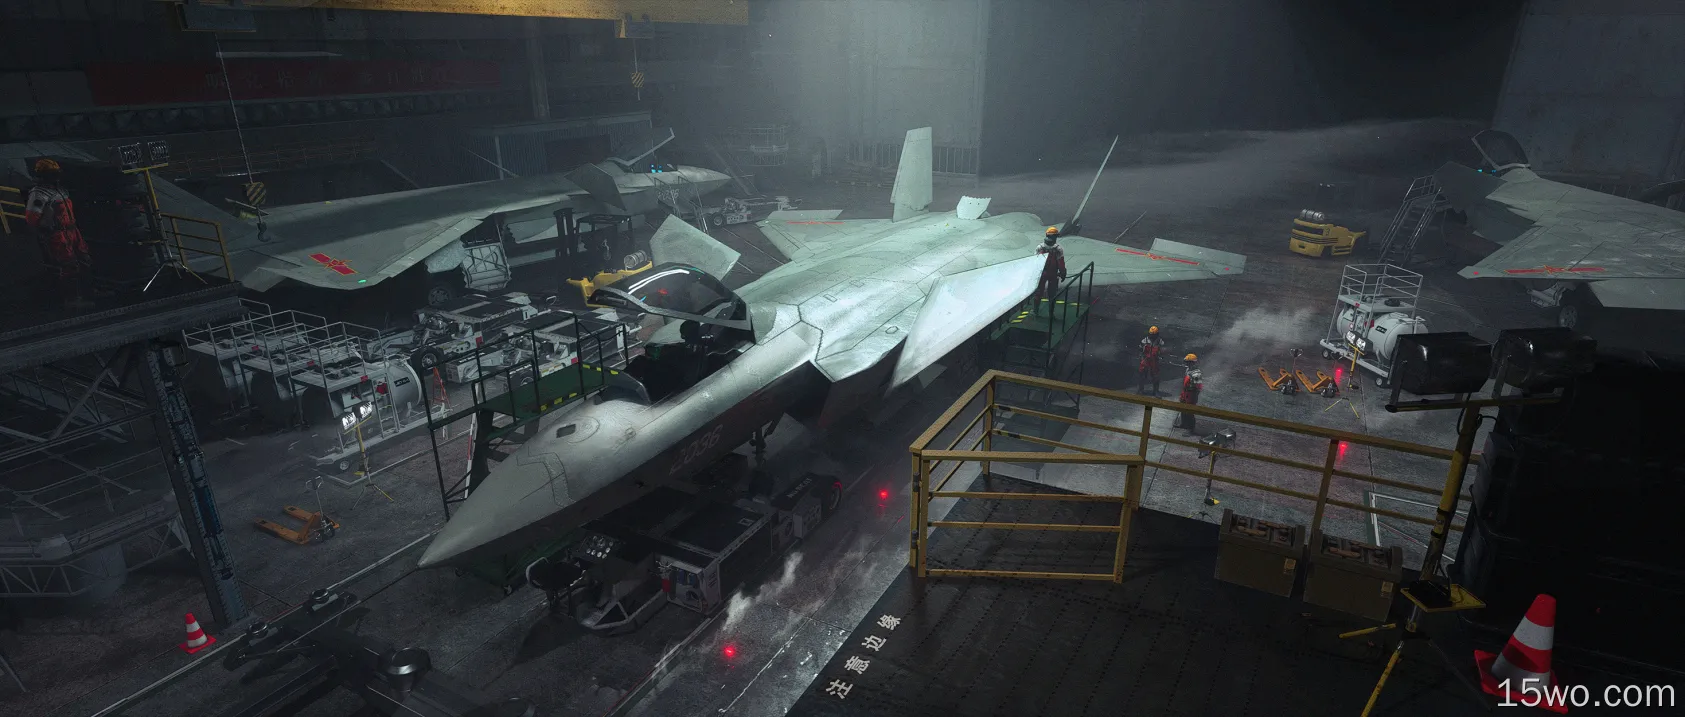 PLAAF,air force,aircraft,jet fighter,Chengdu J-20,CGI,hangar,Chinese Army,military,military aircraft,asian letter,white text